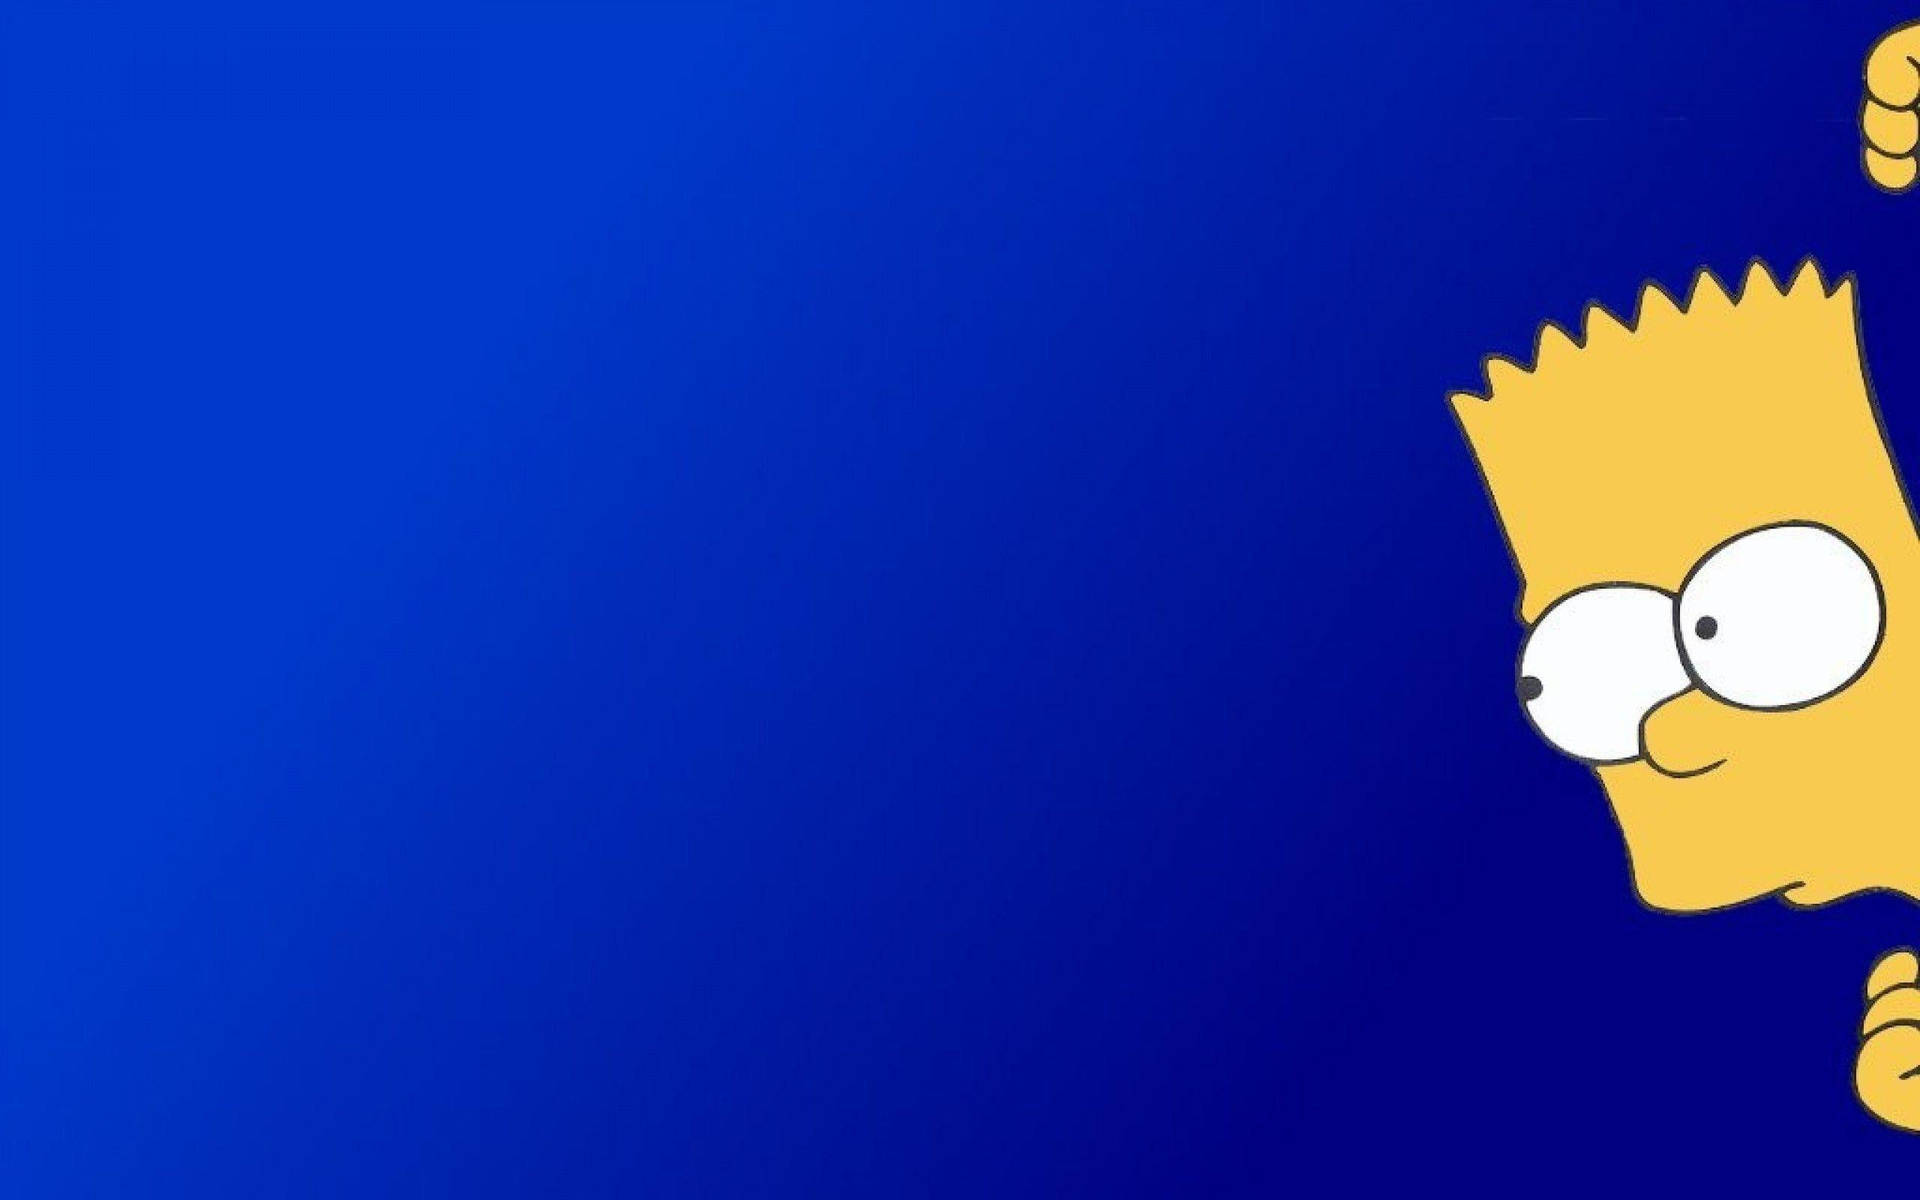 Cool Simpsons Laptop Screen Theme Background